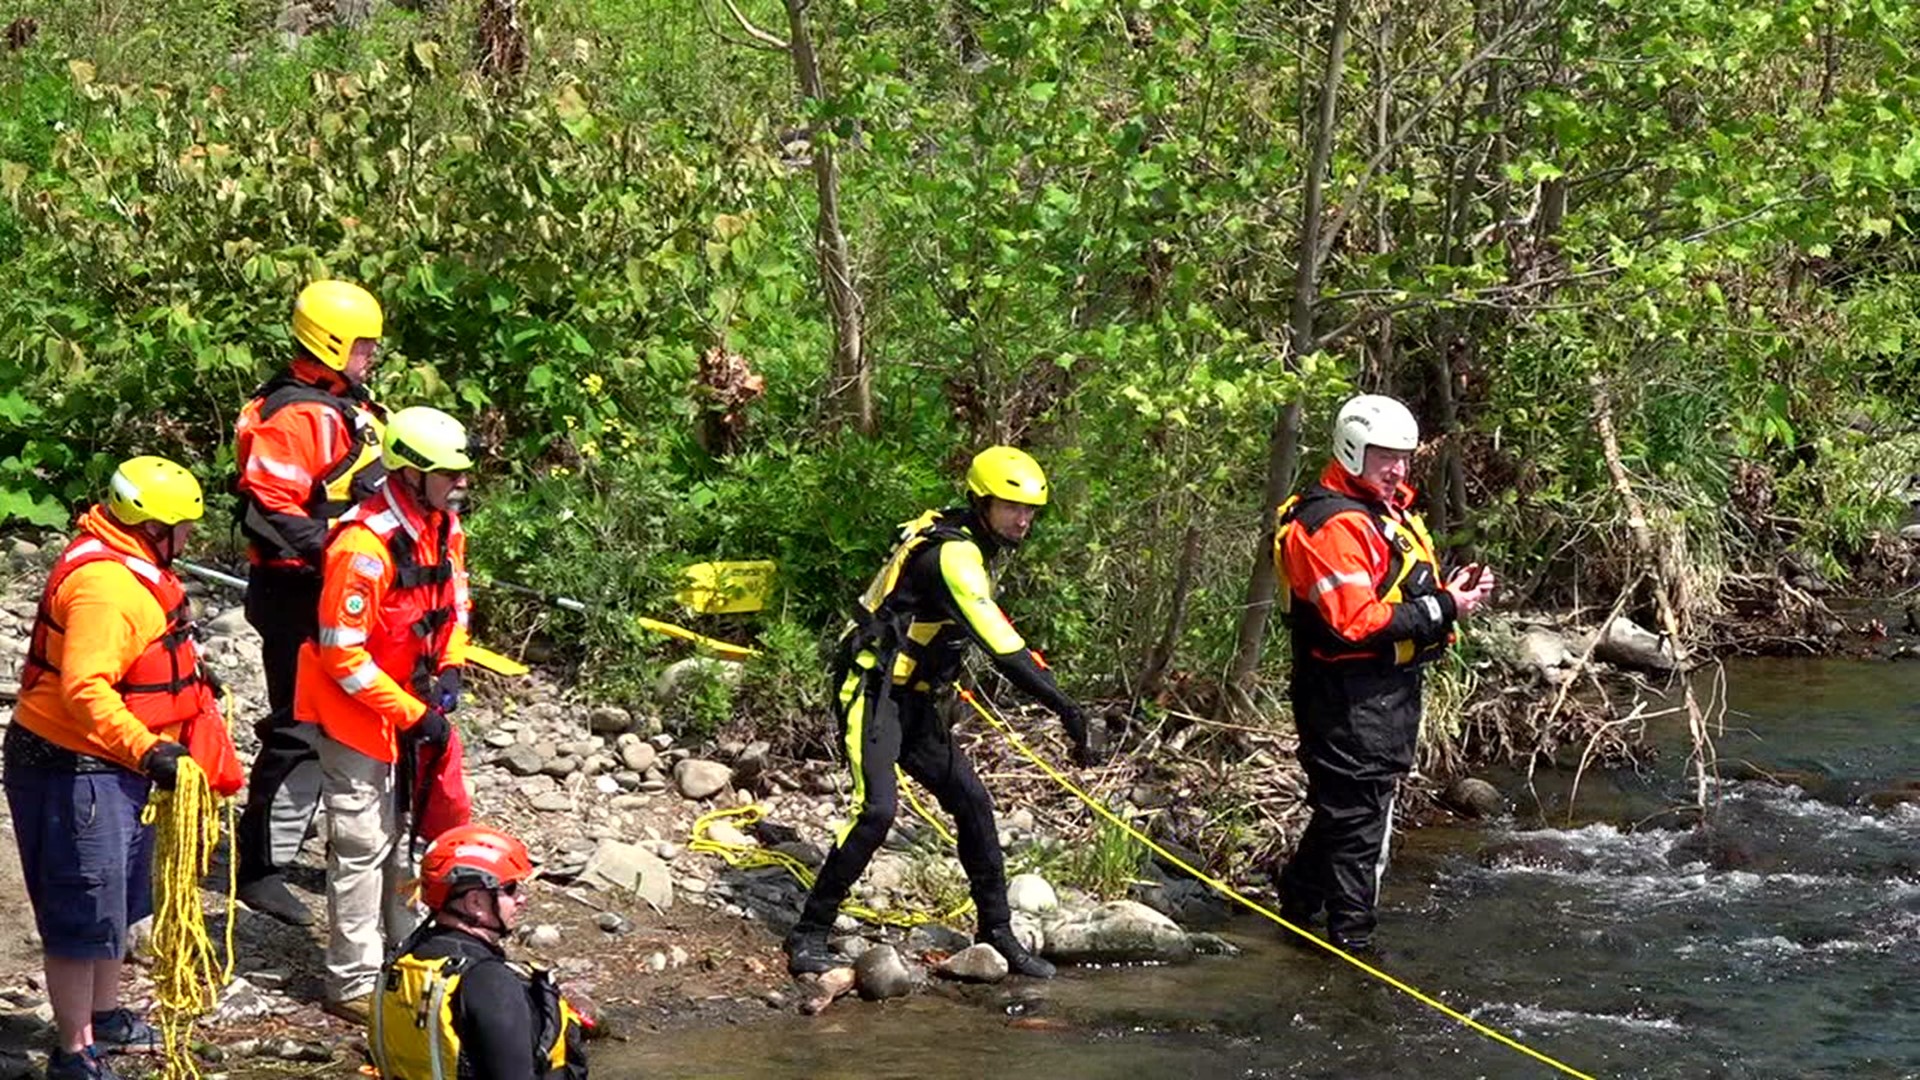 Whether it's on land or in the water, the East Penn Search and Rescue volunteers respond to help lost or injured people in the outdoors.